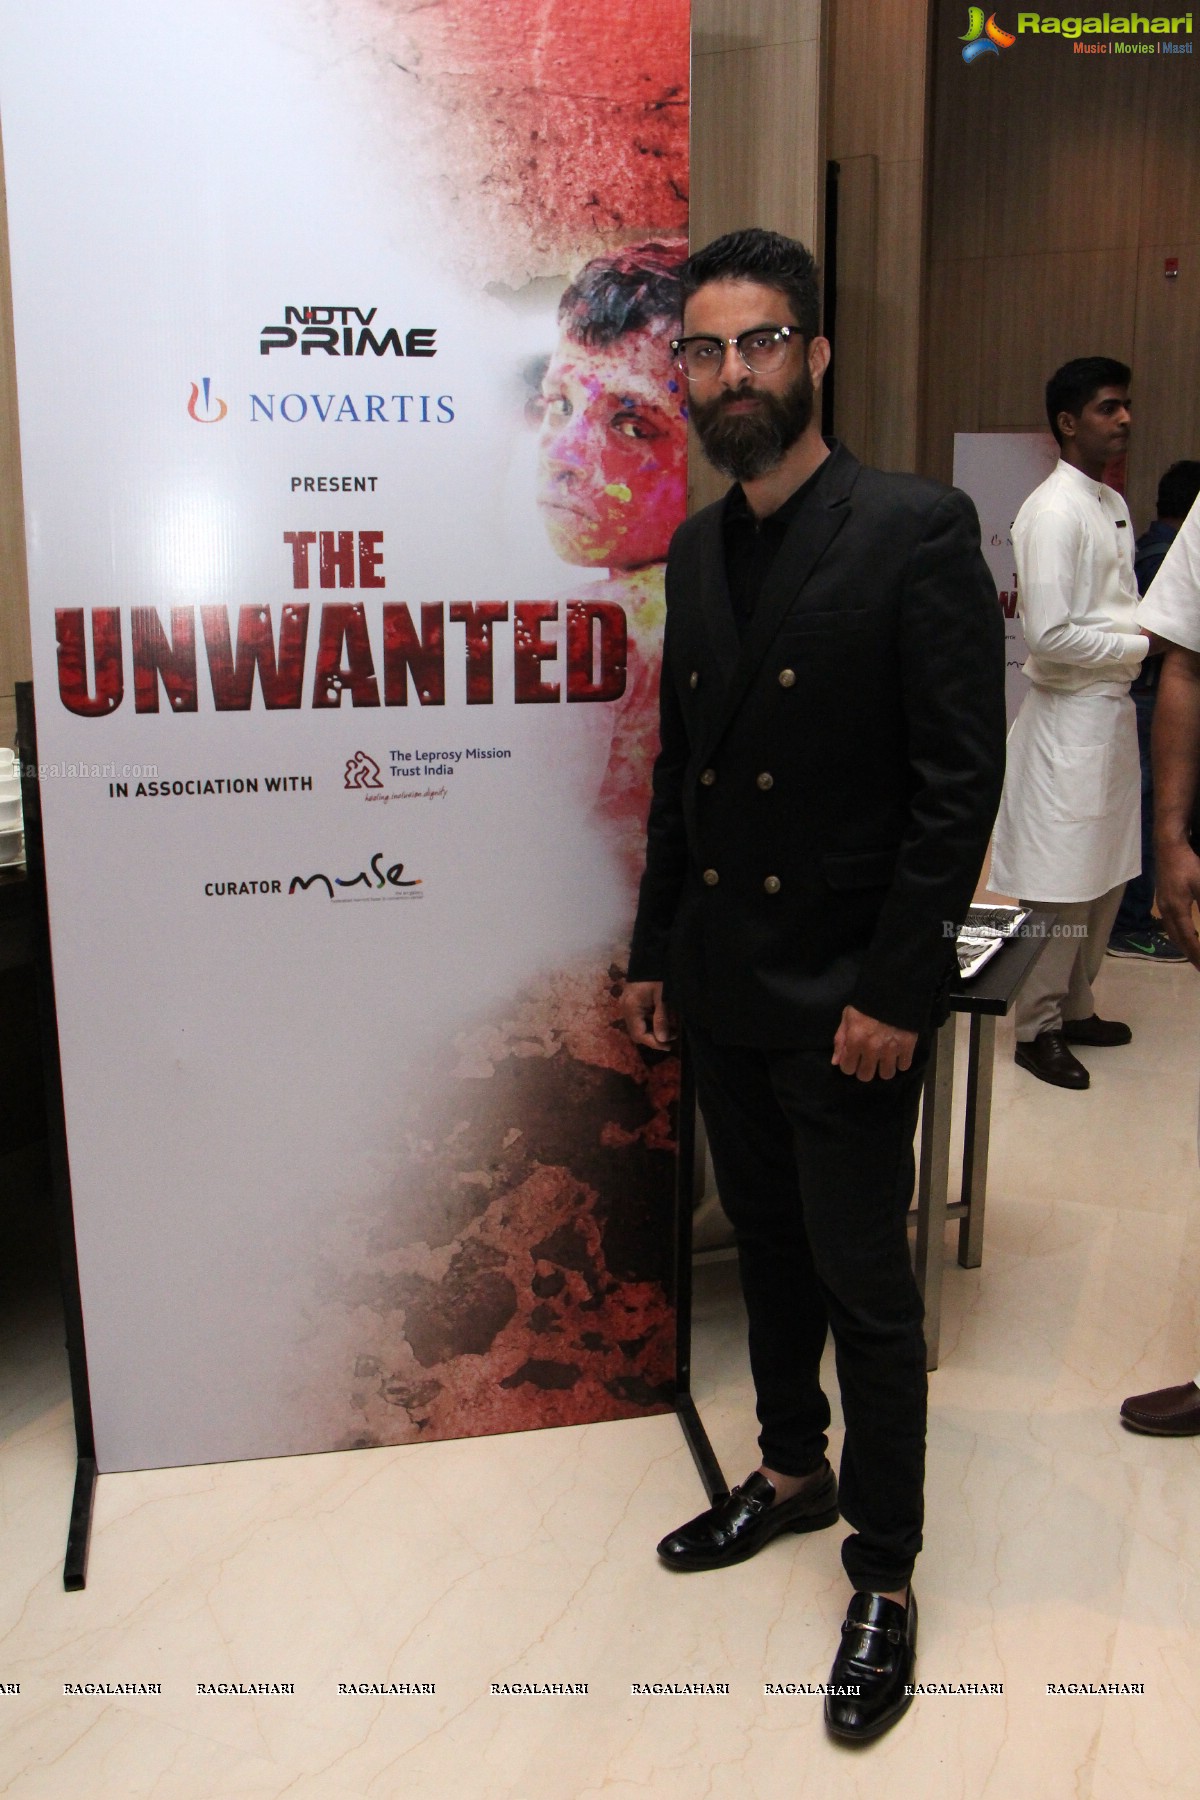 The Unwanted - Special Screening of a Documentary on Leprosy in Hyderabad